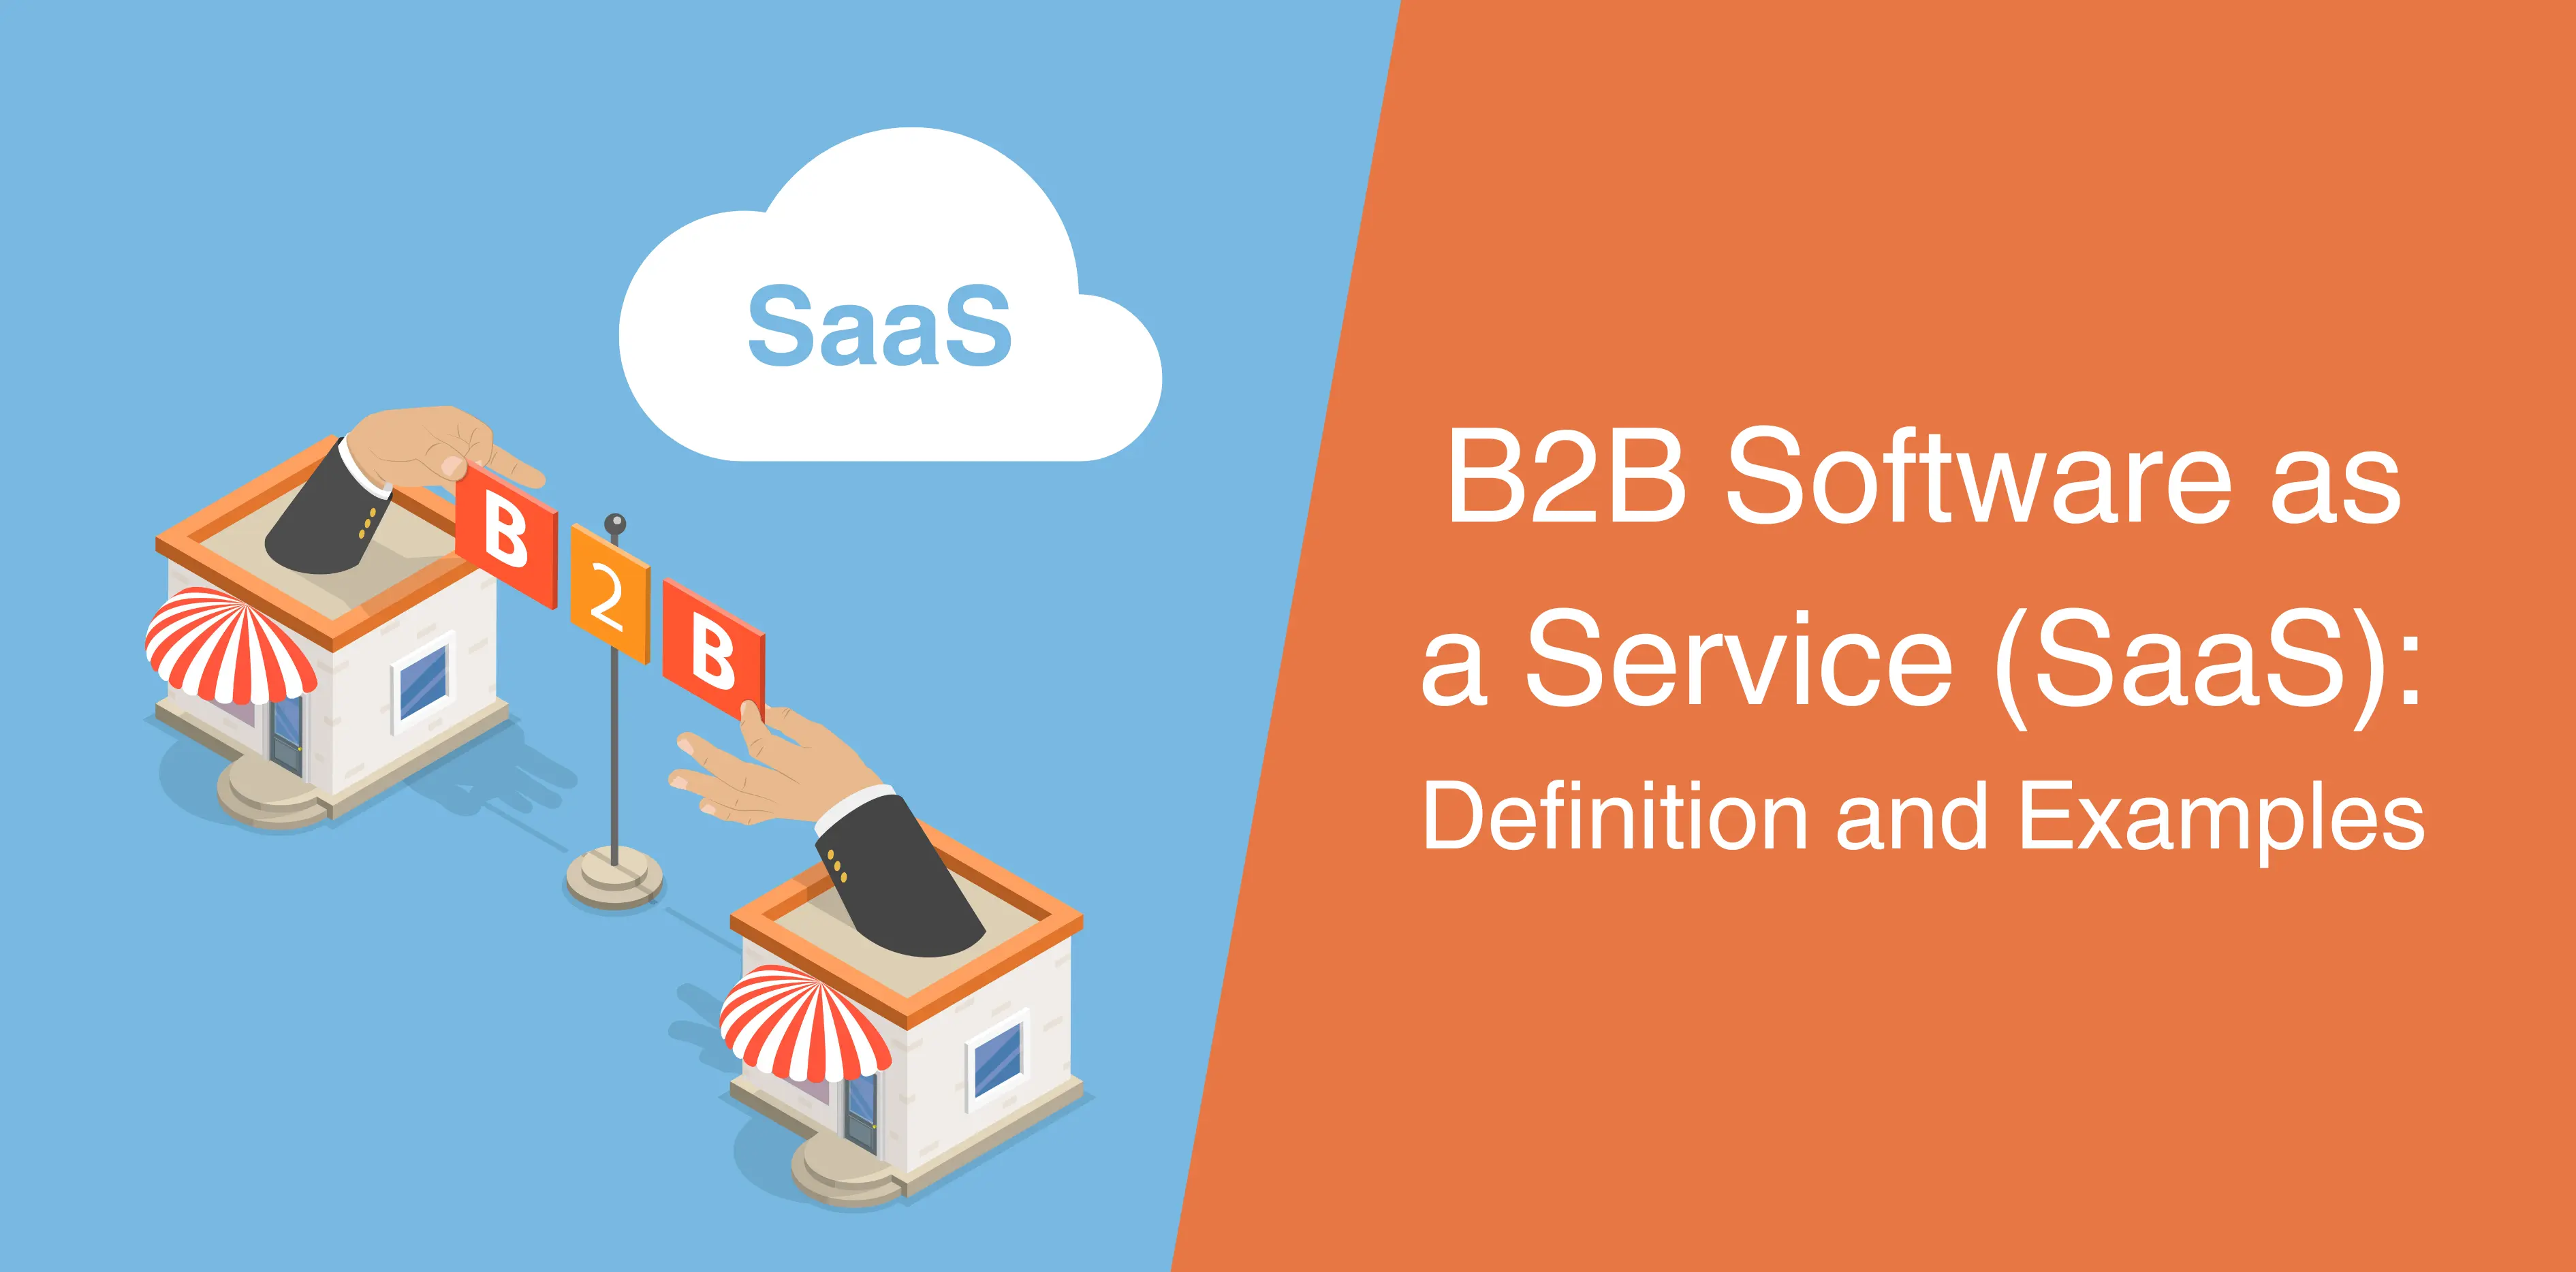 B2B Software as a Service (SaaS): Definition and Examples